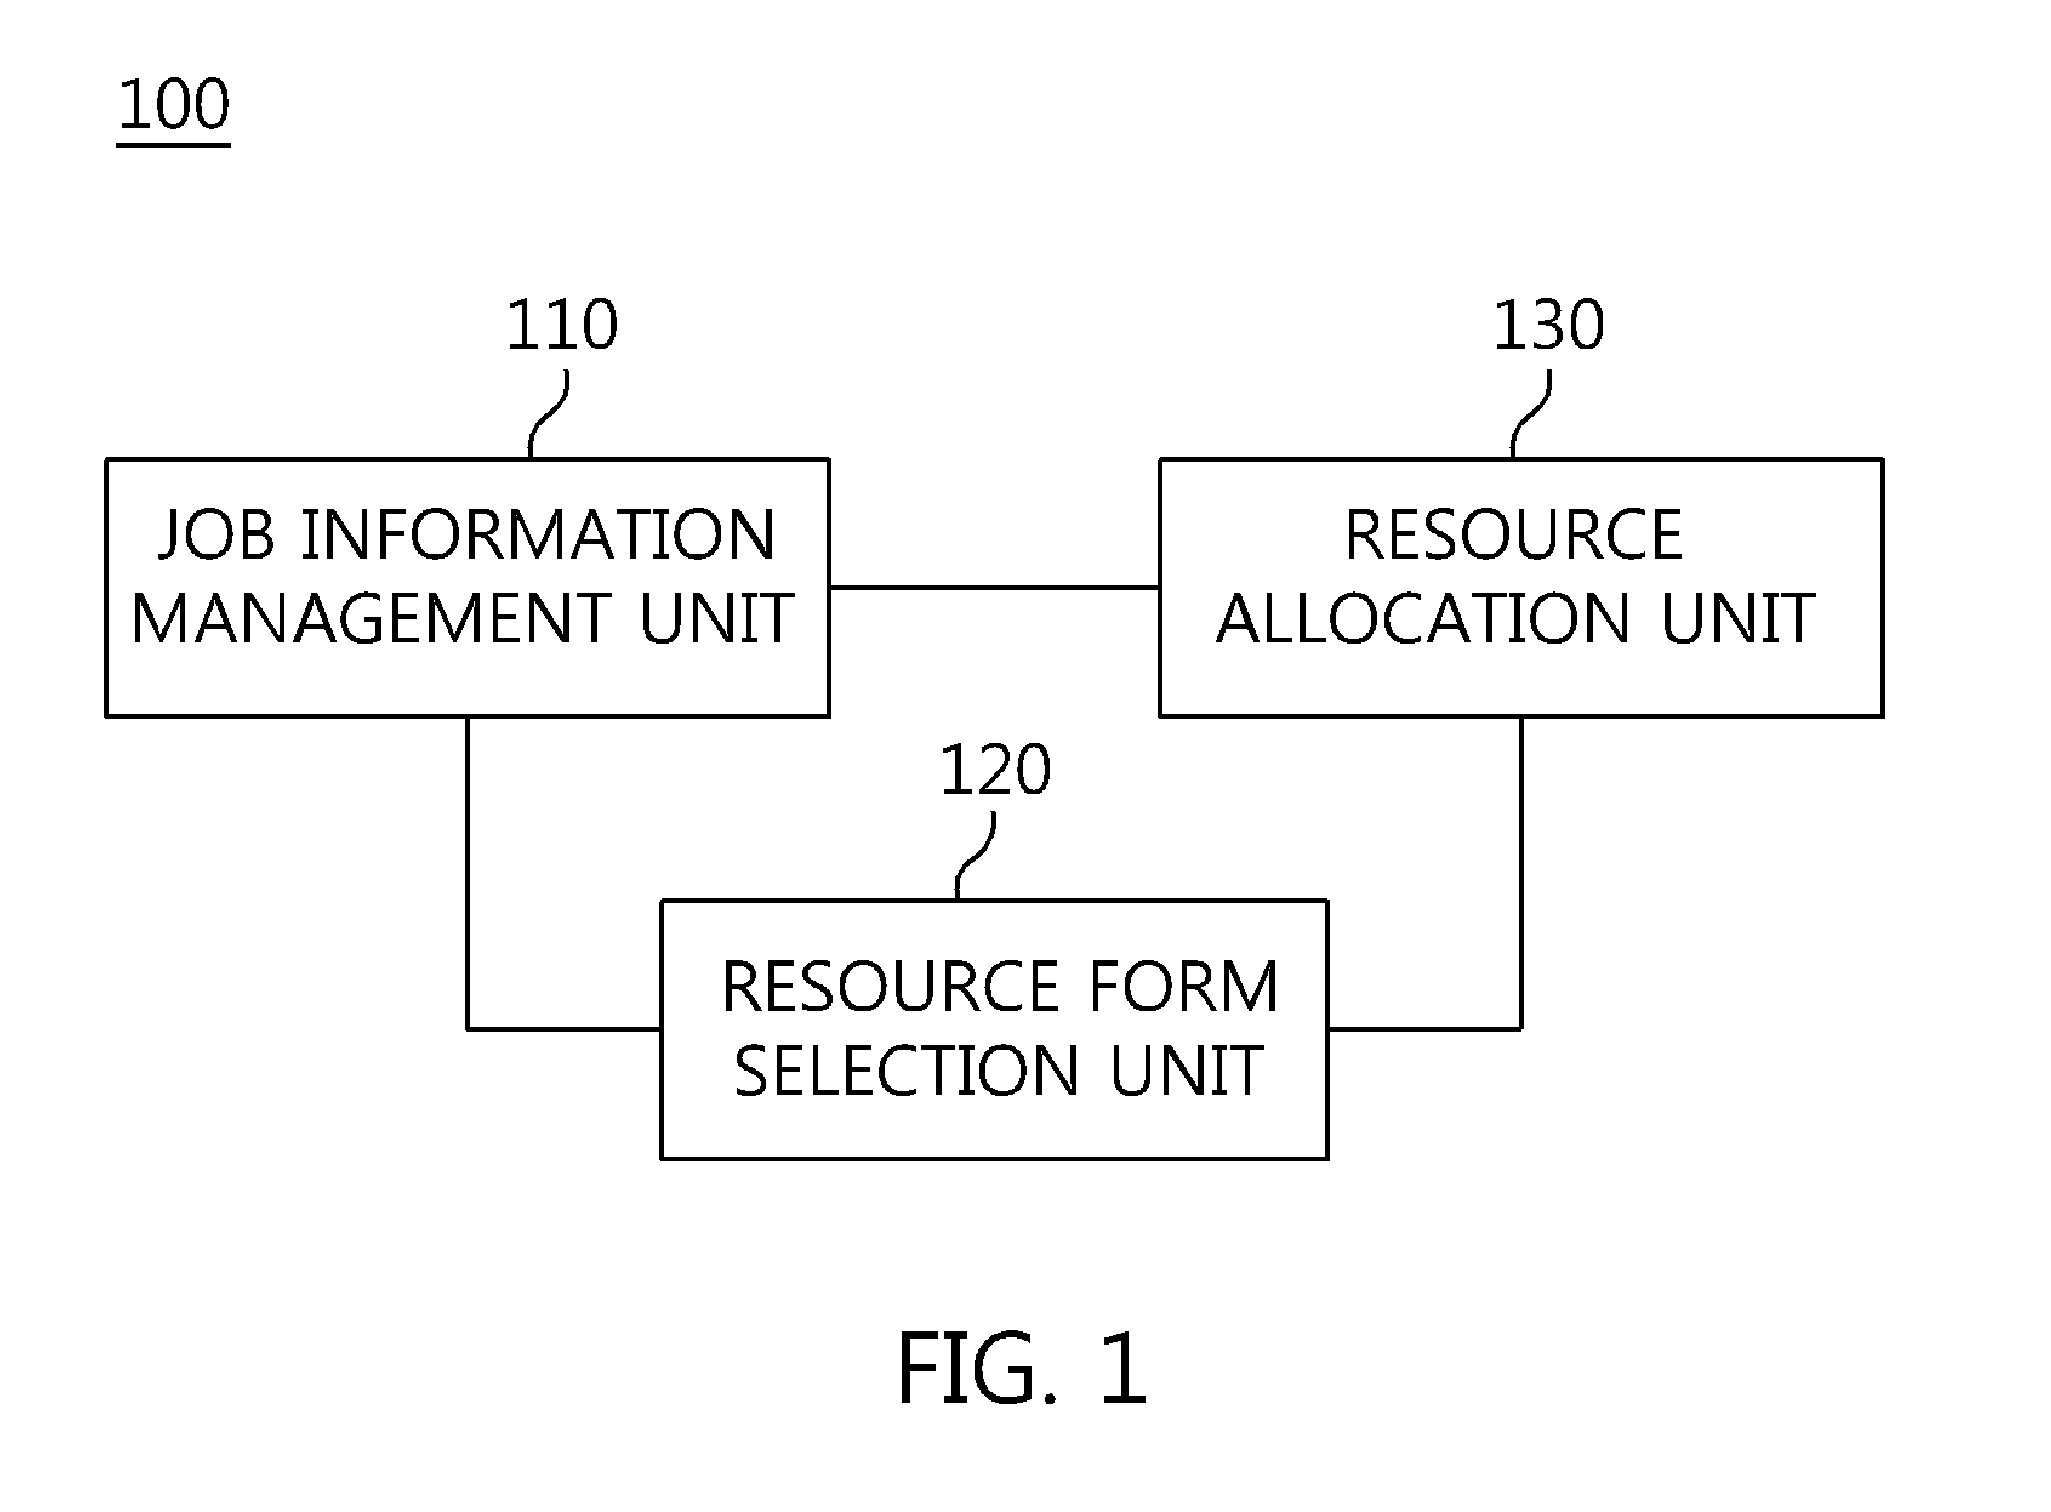 Resource allocation apparatus and method